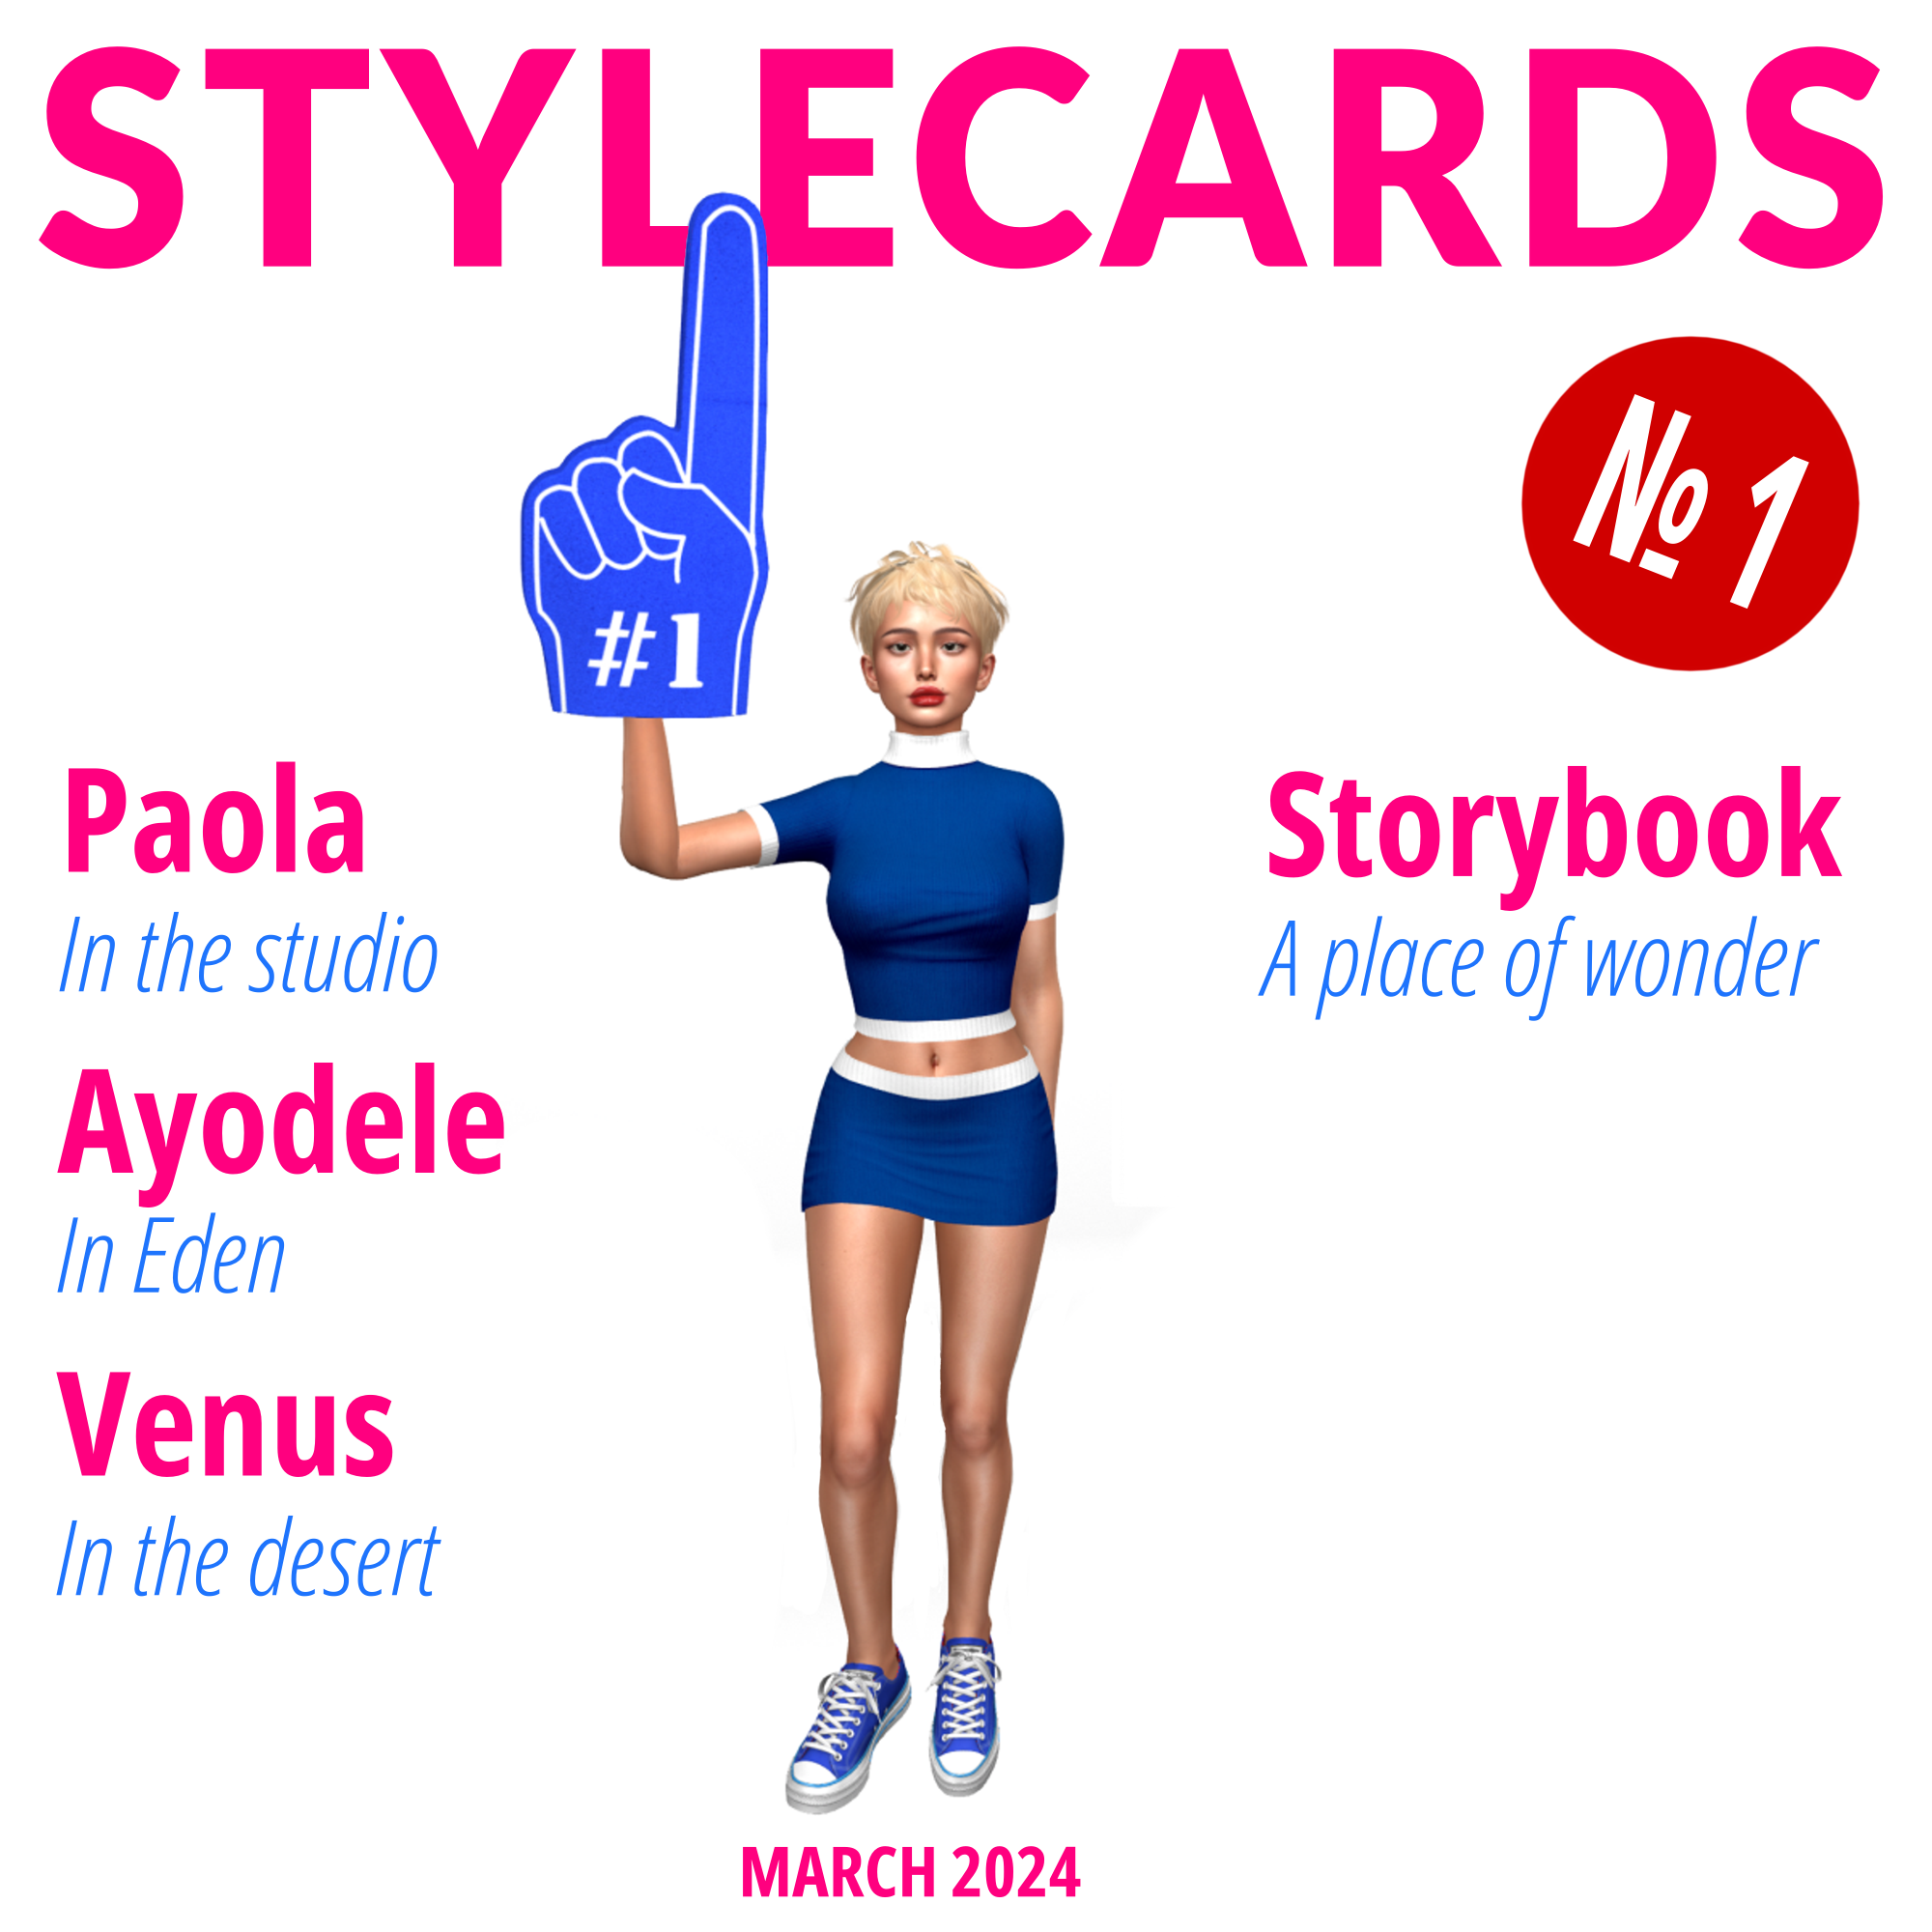 The cover of Stylecards № 1 features Paola de Melho wearing a matching blue crop top and miniskirt set trimmed with white. She is standing in front of a white background and is posed with a blue foam finger with #1 printed on it.